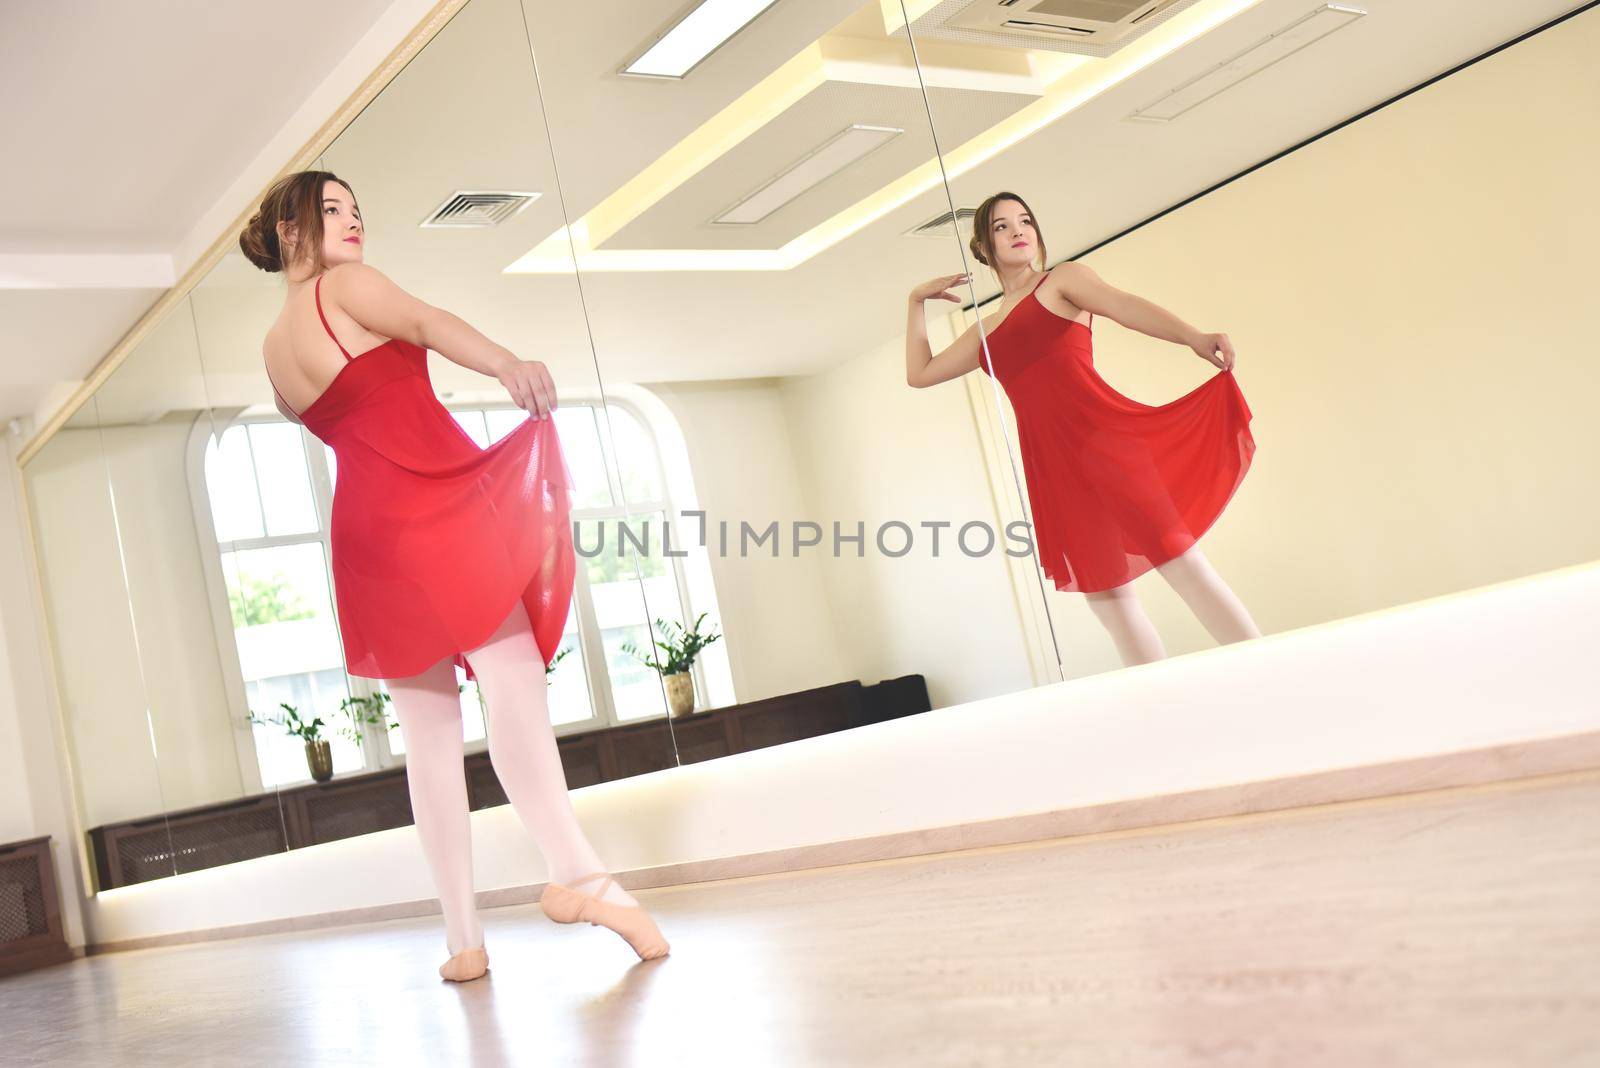 young ballerina in a red dress and pointe shoes performs exercises in a dance studio by Nickstock